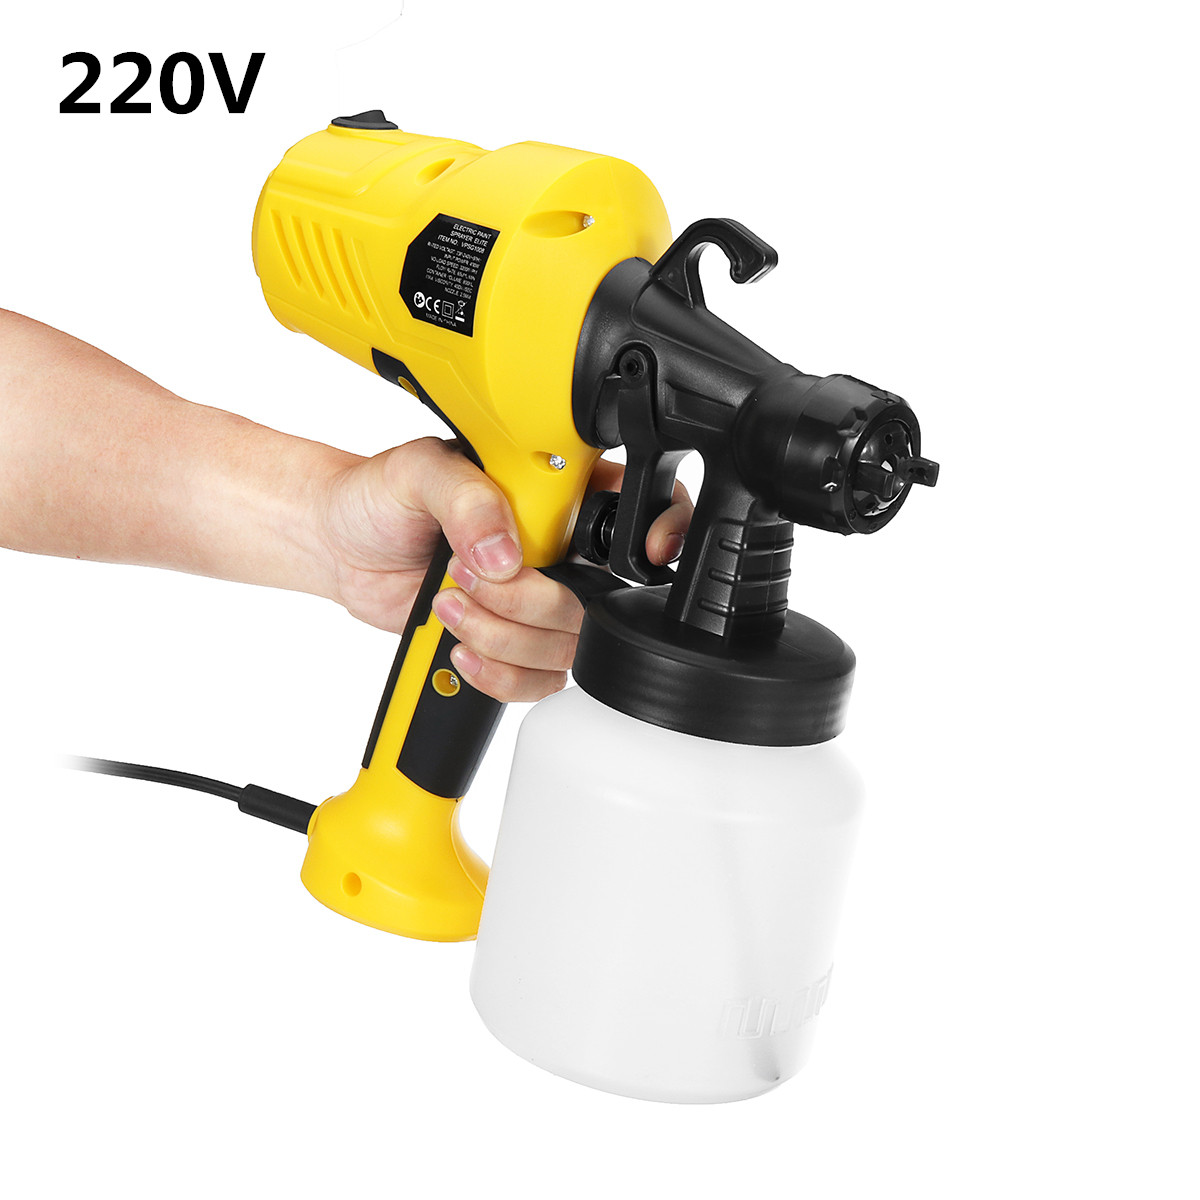 600W Electric Spray Paint Sprayer For Cars Wood Furniture Wall Woodworking 24